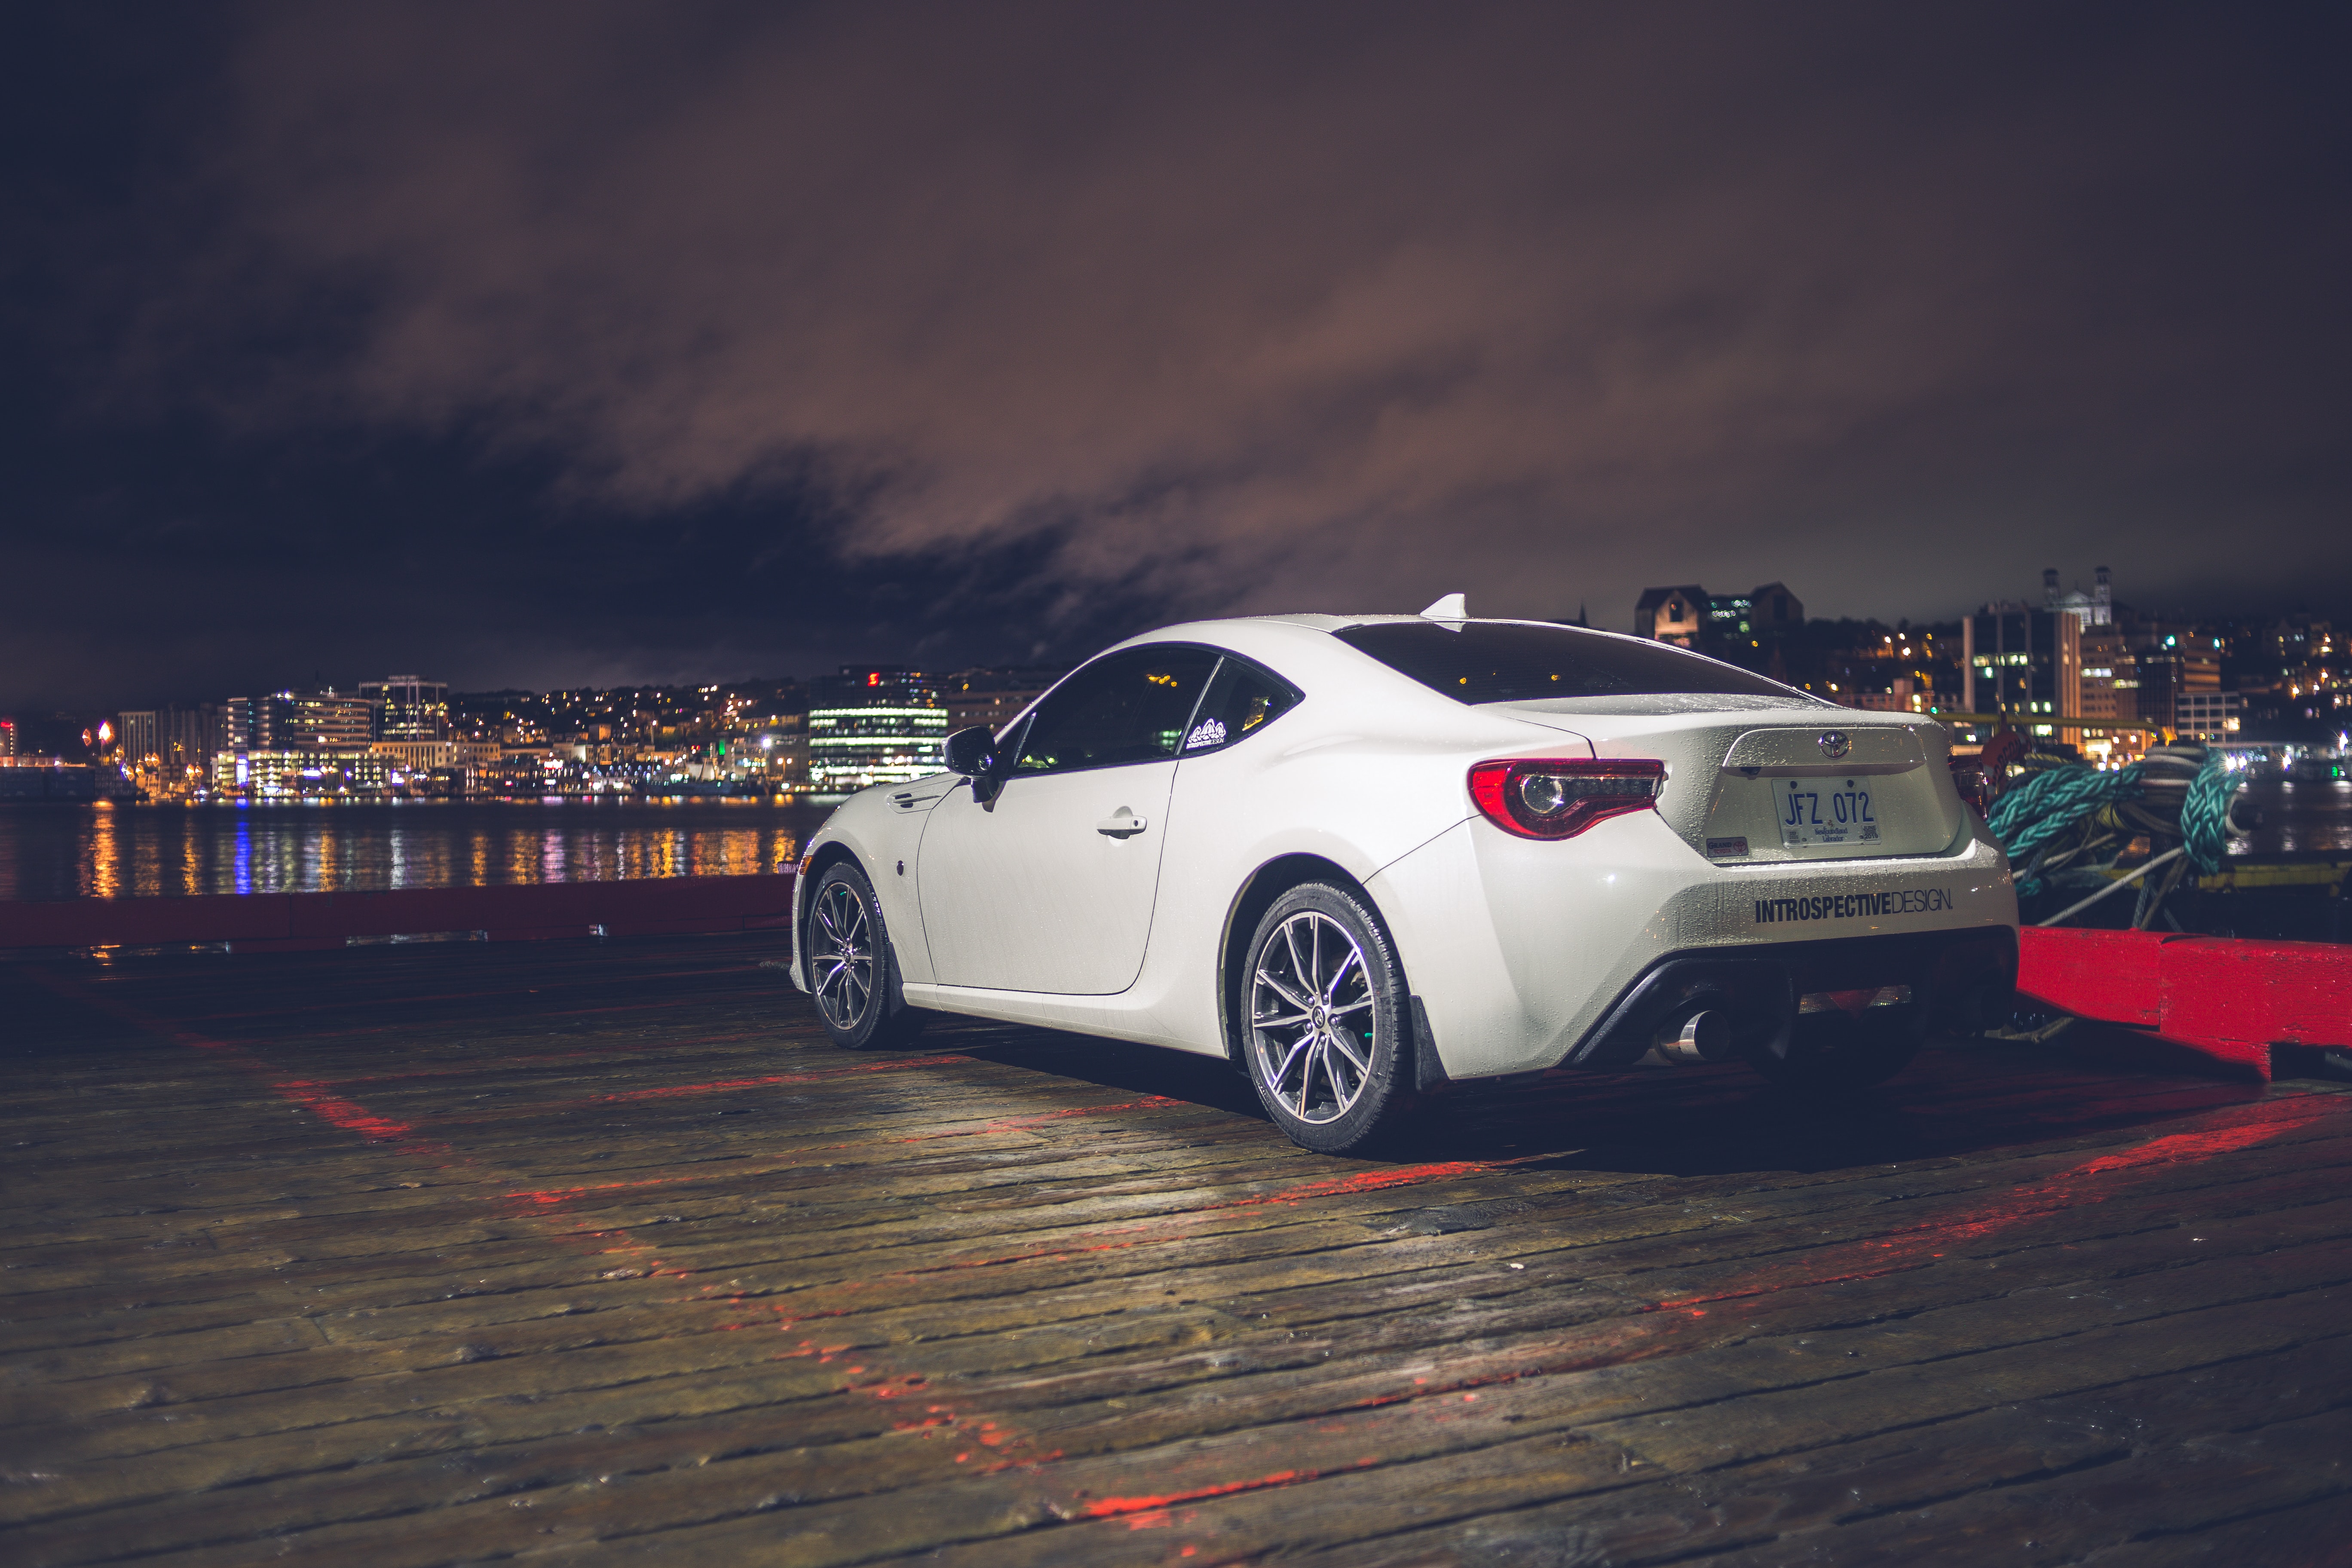 side view, toyota, cars, white, car Image for desktop